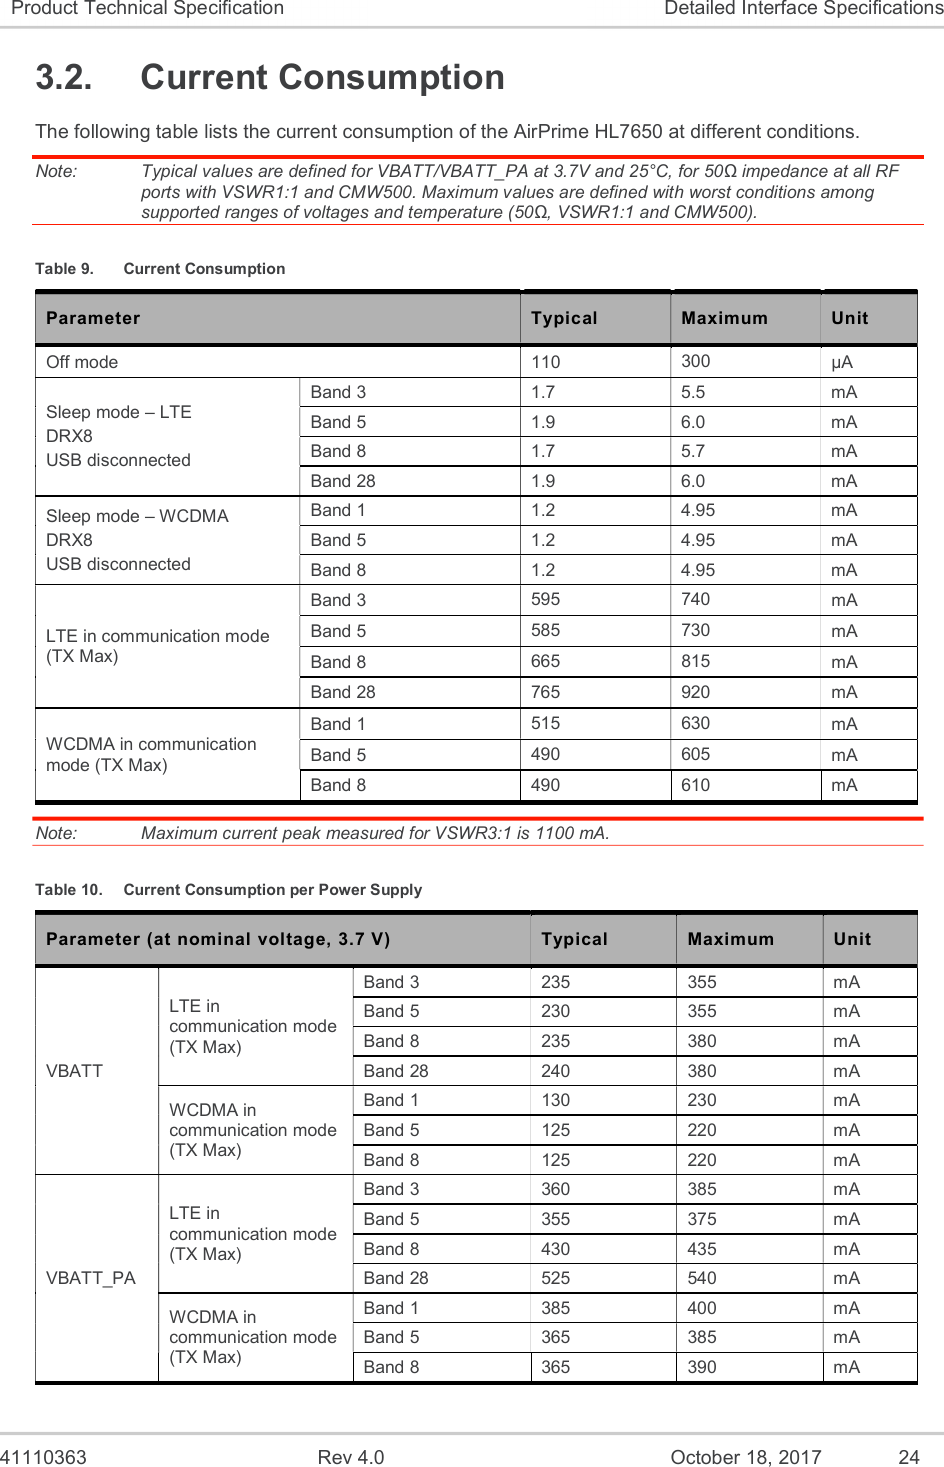   41110363  Rev 4.0  October 18, 2017  24 Product Technical Specification  Detailed Interface Specifications 3.2.  Current Consumption  The following table lists the current consumption of the AirPrime HL7650 at different conditions. Note:   Typical values are defined for VBATT/VBATT_PA at 3.7V and 25°C, for 50Ω impedance at all RF ports with VSWR1:1 and CMW500. Maximum values are defined with worst conditions among supported ranges of voltages and temperature (50Ω, VSWR1:1 and CMW500). Table 9.  Current Consumption Parameter  Typical  Maximum  Unit Off mode  110  300  µA Sleep mode – LTE  DRX8 USB disconnected Band 3  1.7  5.5  mA Band 5  1.9  6.0  mA Band 8  1.7  5.7  mA Band 28  1.9  6.0  mA Sleep mode – WCDMA DRX8 USB disconnected Band 1  1.2  4.95  mA Band 5  1.2  4.95  mA Band 8  1.2  4.95  mA LTE in communication mode (TX Max) Band 3  595  740  mA Band 5  585  730  mA Band 8  665  815  mA Band 28  765  920  mA WCDMA in communication mode (TX Max) Band 1  515  630  mA Band 5  490  605  mA Band 8  490  610  mA Note:   Maximum current peak measured for VSWR3:1 is 1100 mA. Table 10.  Current Consumption per Power Supply Parameter (at nominal voltage, 3.7 V)  Typical  Maximum  Unit VBATT LTE in communication mode (TX Max) Band 3  235  355  mA Band 5  230  355  mA Band 8  235  380  mA Band 28  240  380  mA WCDMA in communication mode (TX Max) Band 1  130  230  mA Band 5  125  220  mA Band 8  125  220  mA VBATT_PA LTE in communication mode (TX Max) Band 3  360  385  mA Band 5  355  375  mA Band 8  430  435  mA Band 28  525  540  mA WCDMA in communication mode (TX Max) Band 1  385  400  mA Band 5  365  385  mA Band 8  365  390  mA 